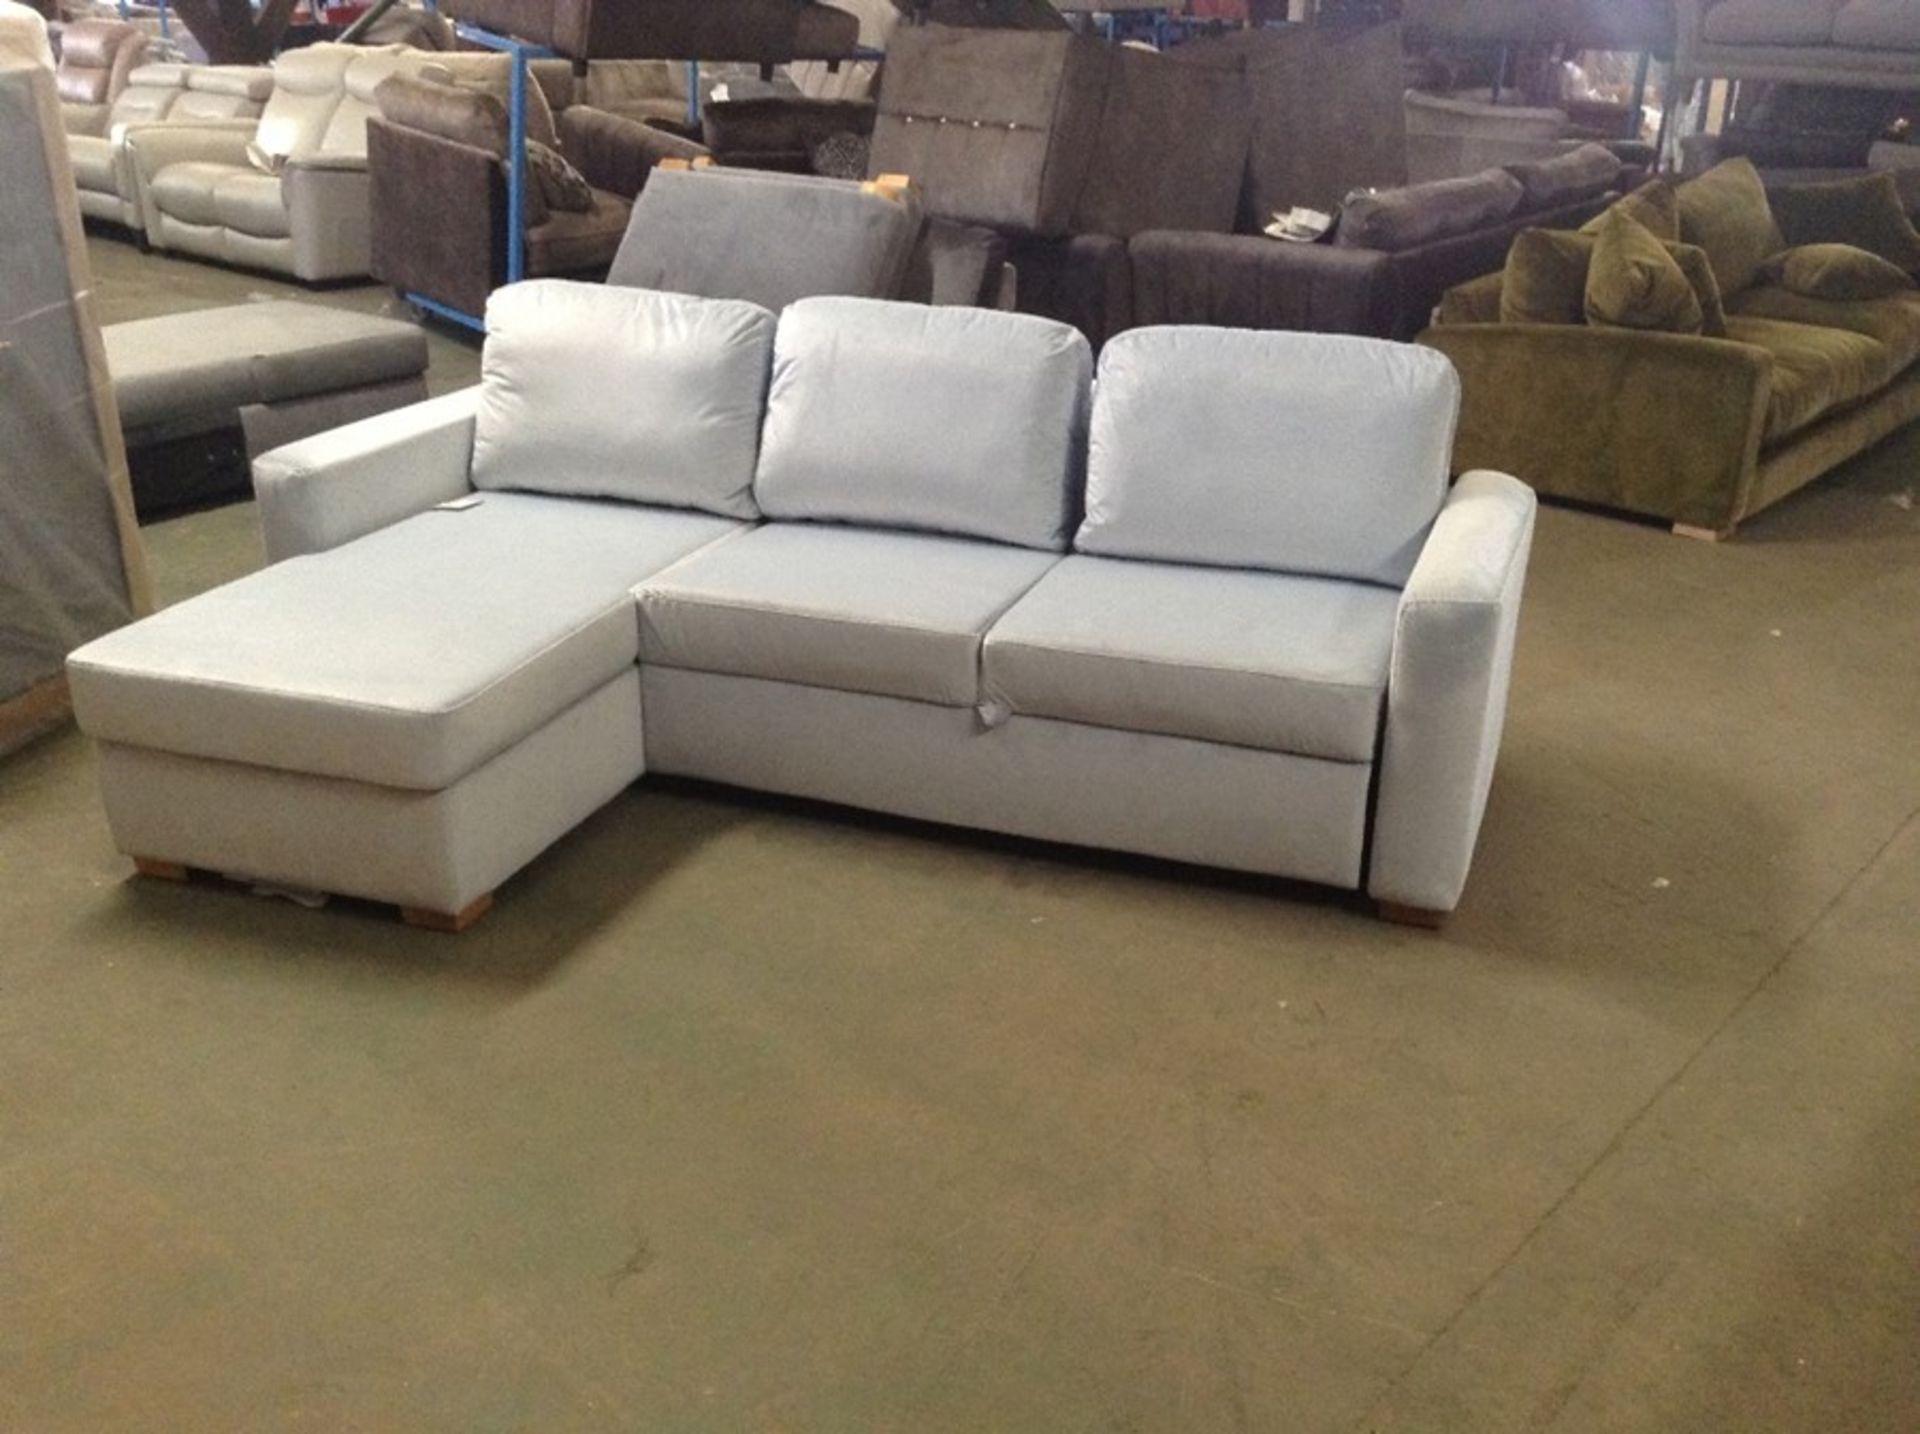 SACHA OPULENCE BABY BLUE SOFABED(SFL3014)